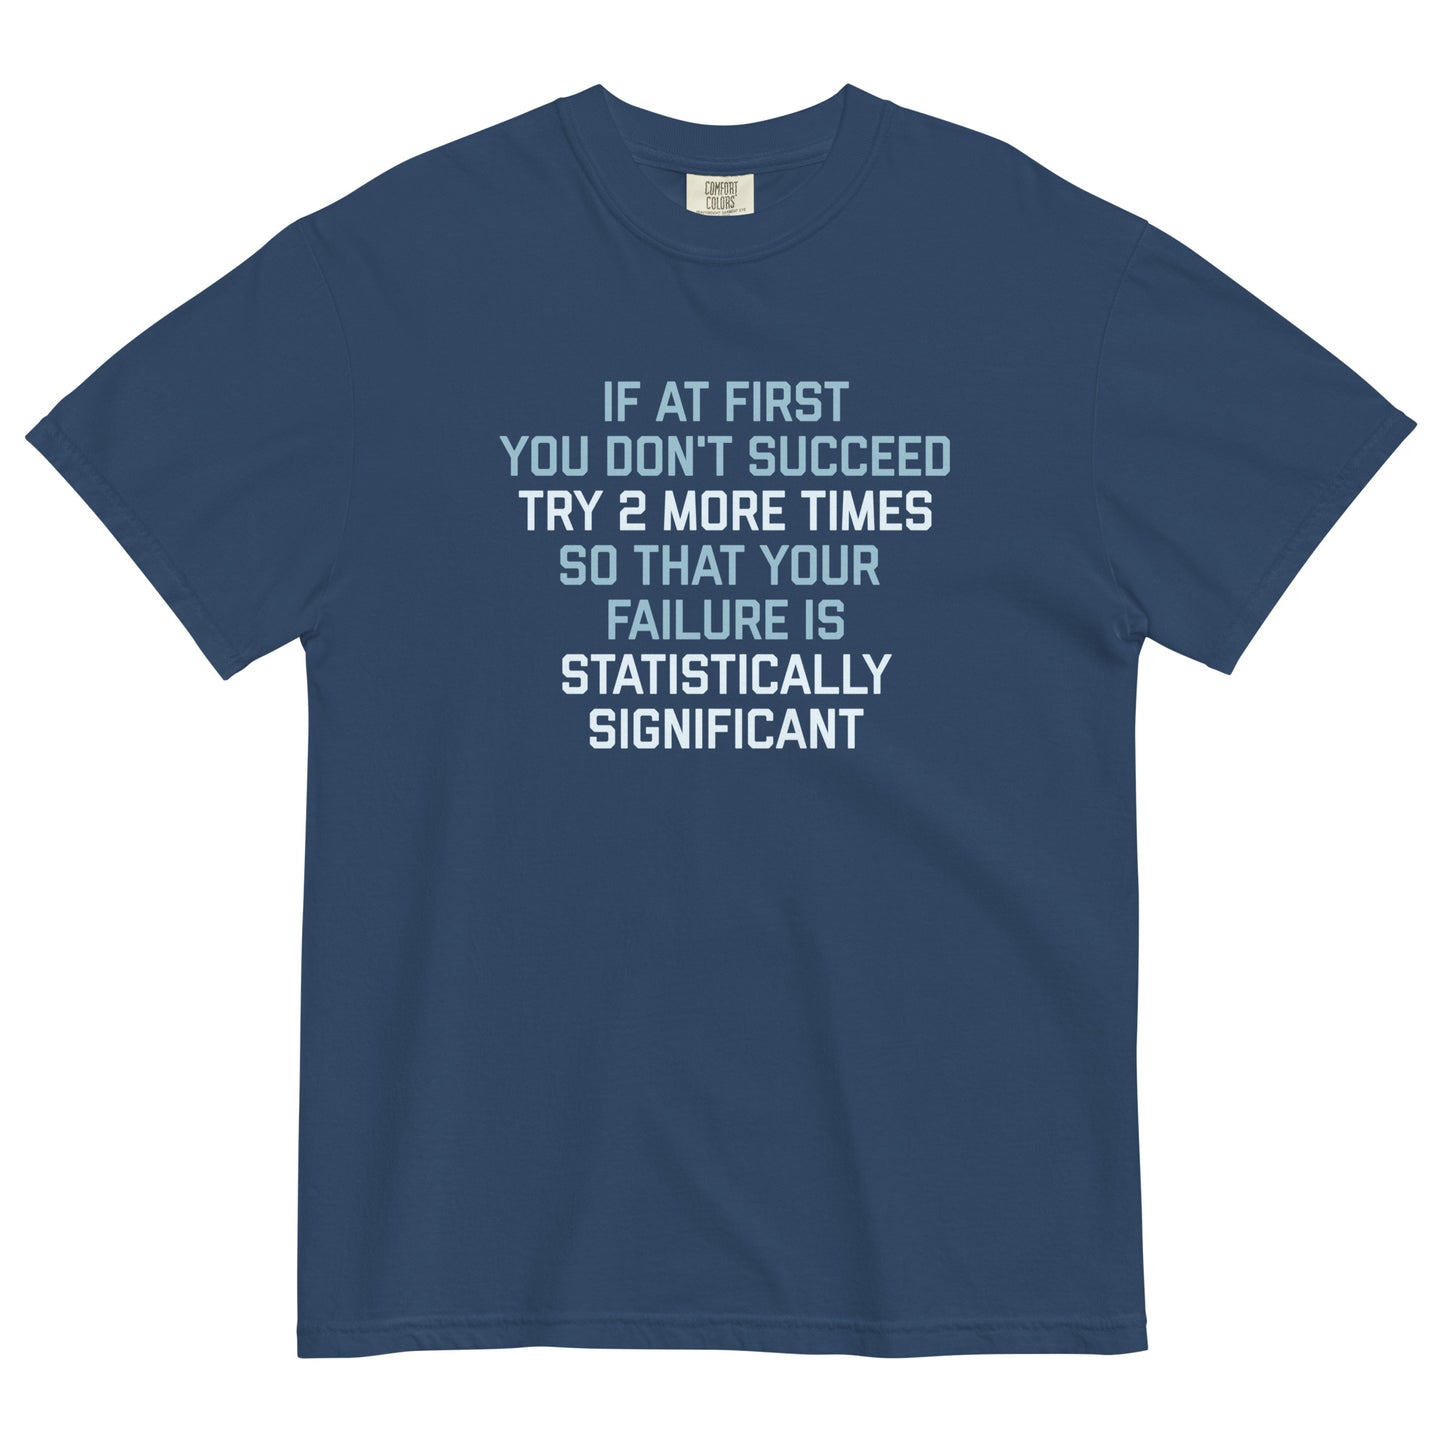 Try 2 More Times So That Your Failure Is Statistically Significant Men's Relaxed Fit Tee